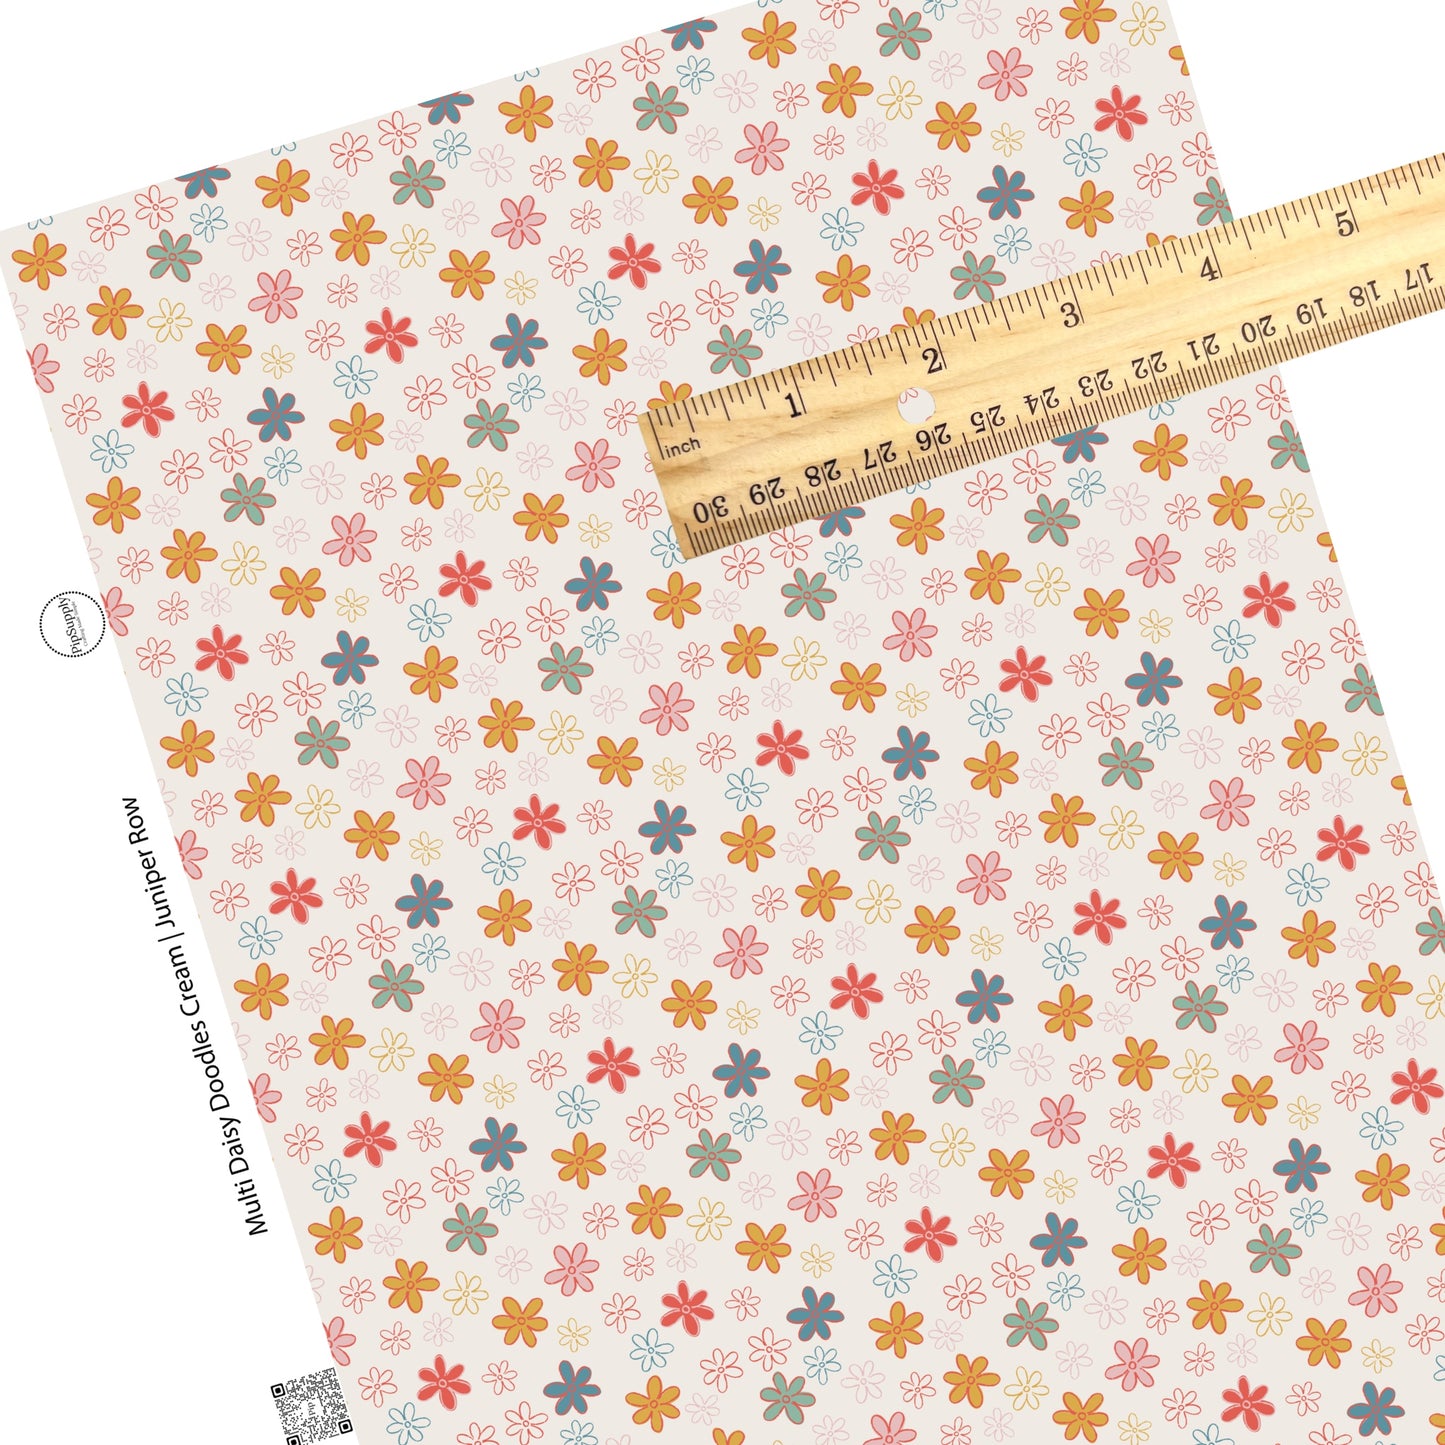 Scattered floral on cream faux leather sheets